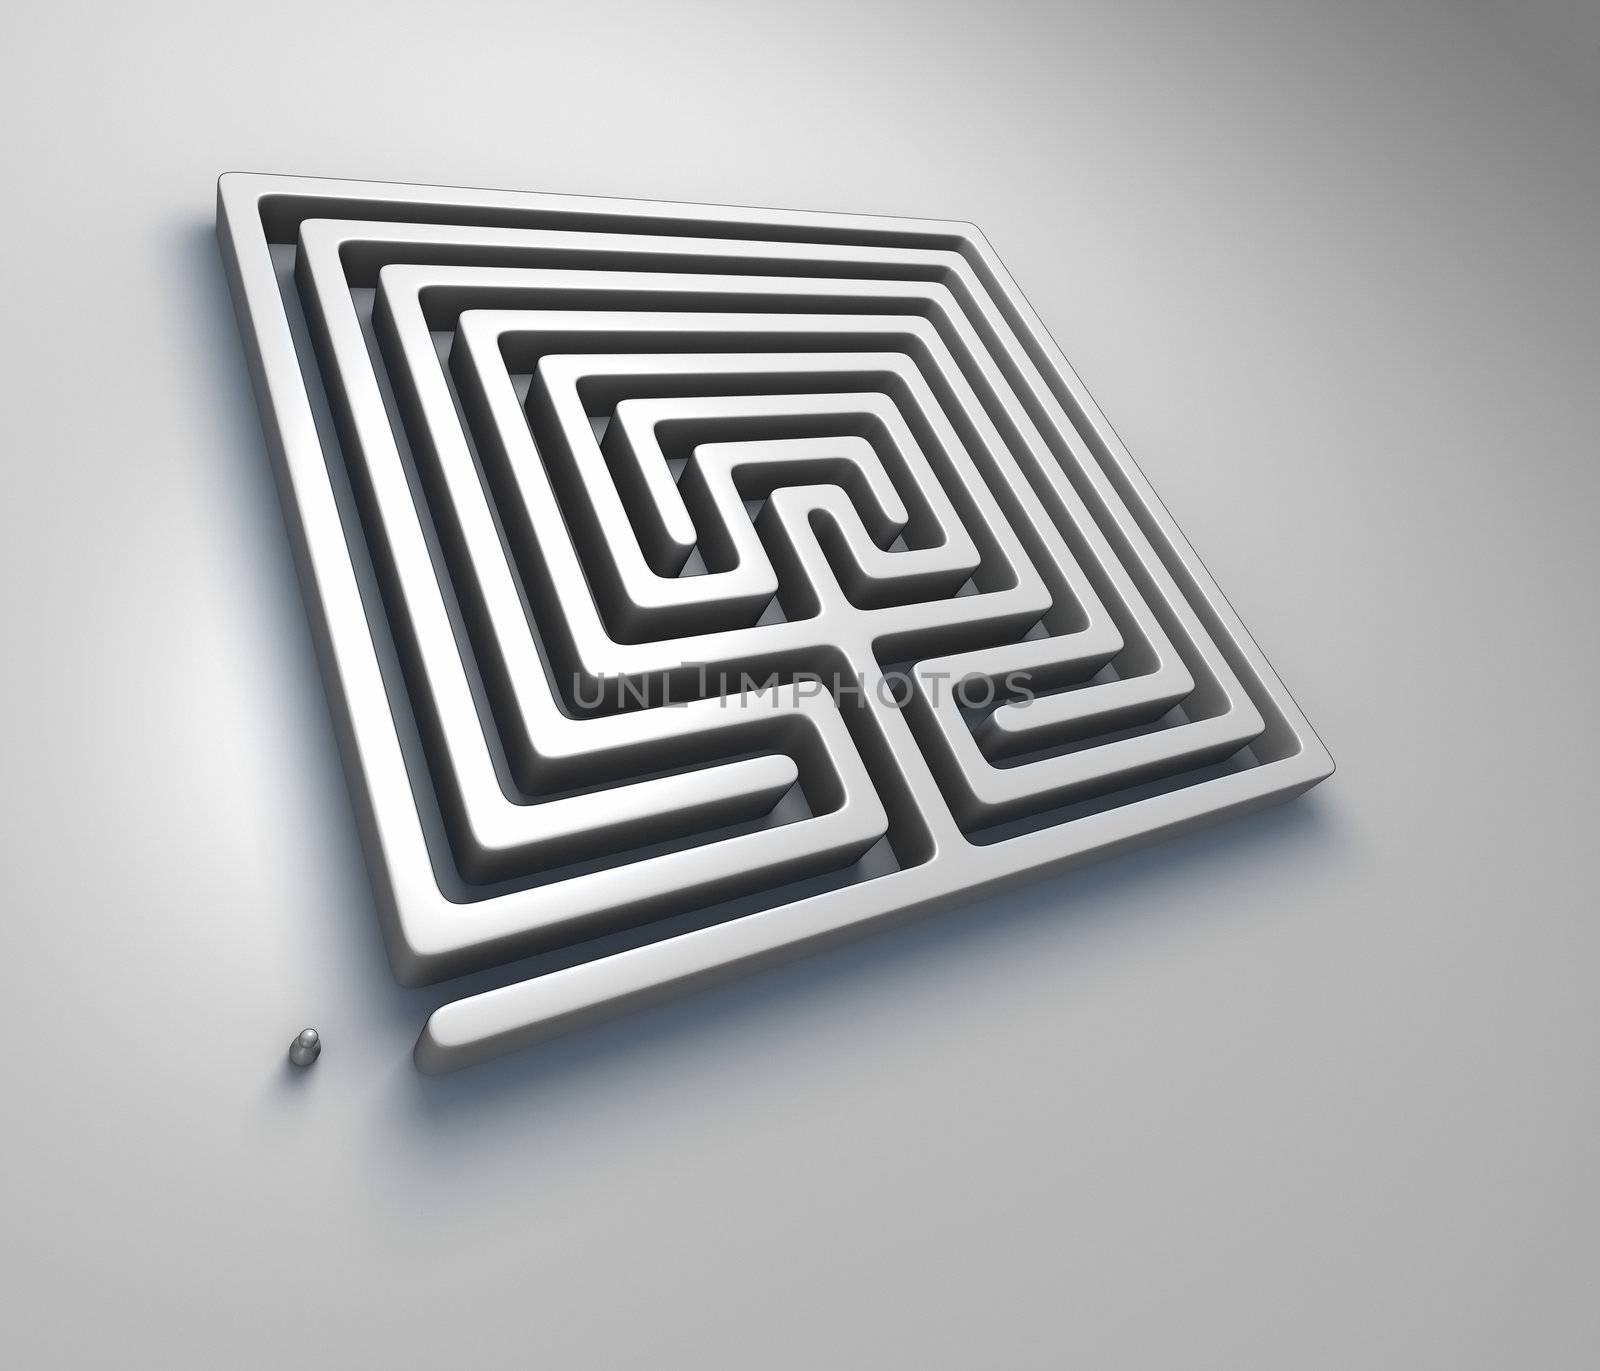 An image of a nice classic labyrinth